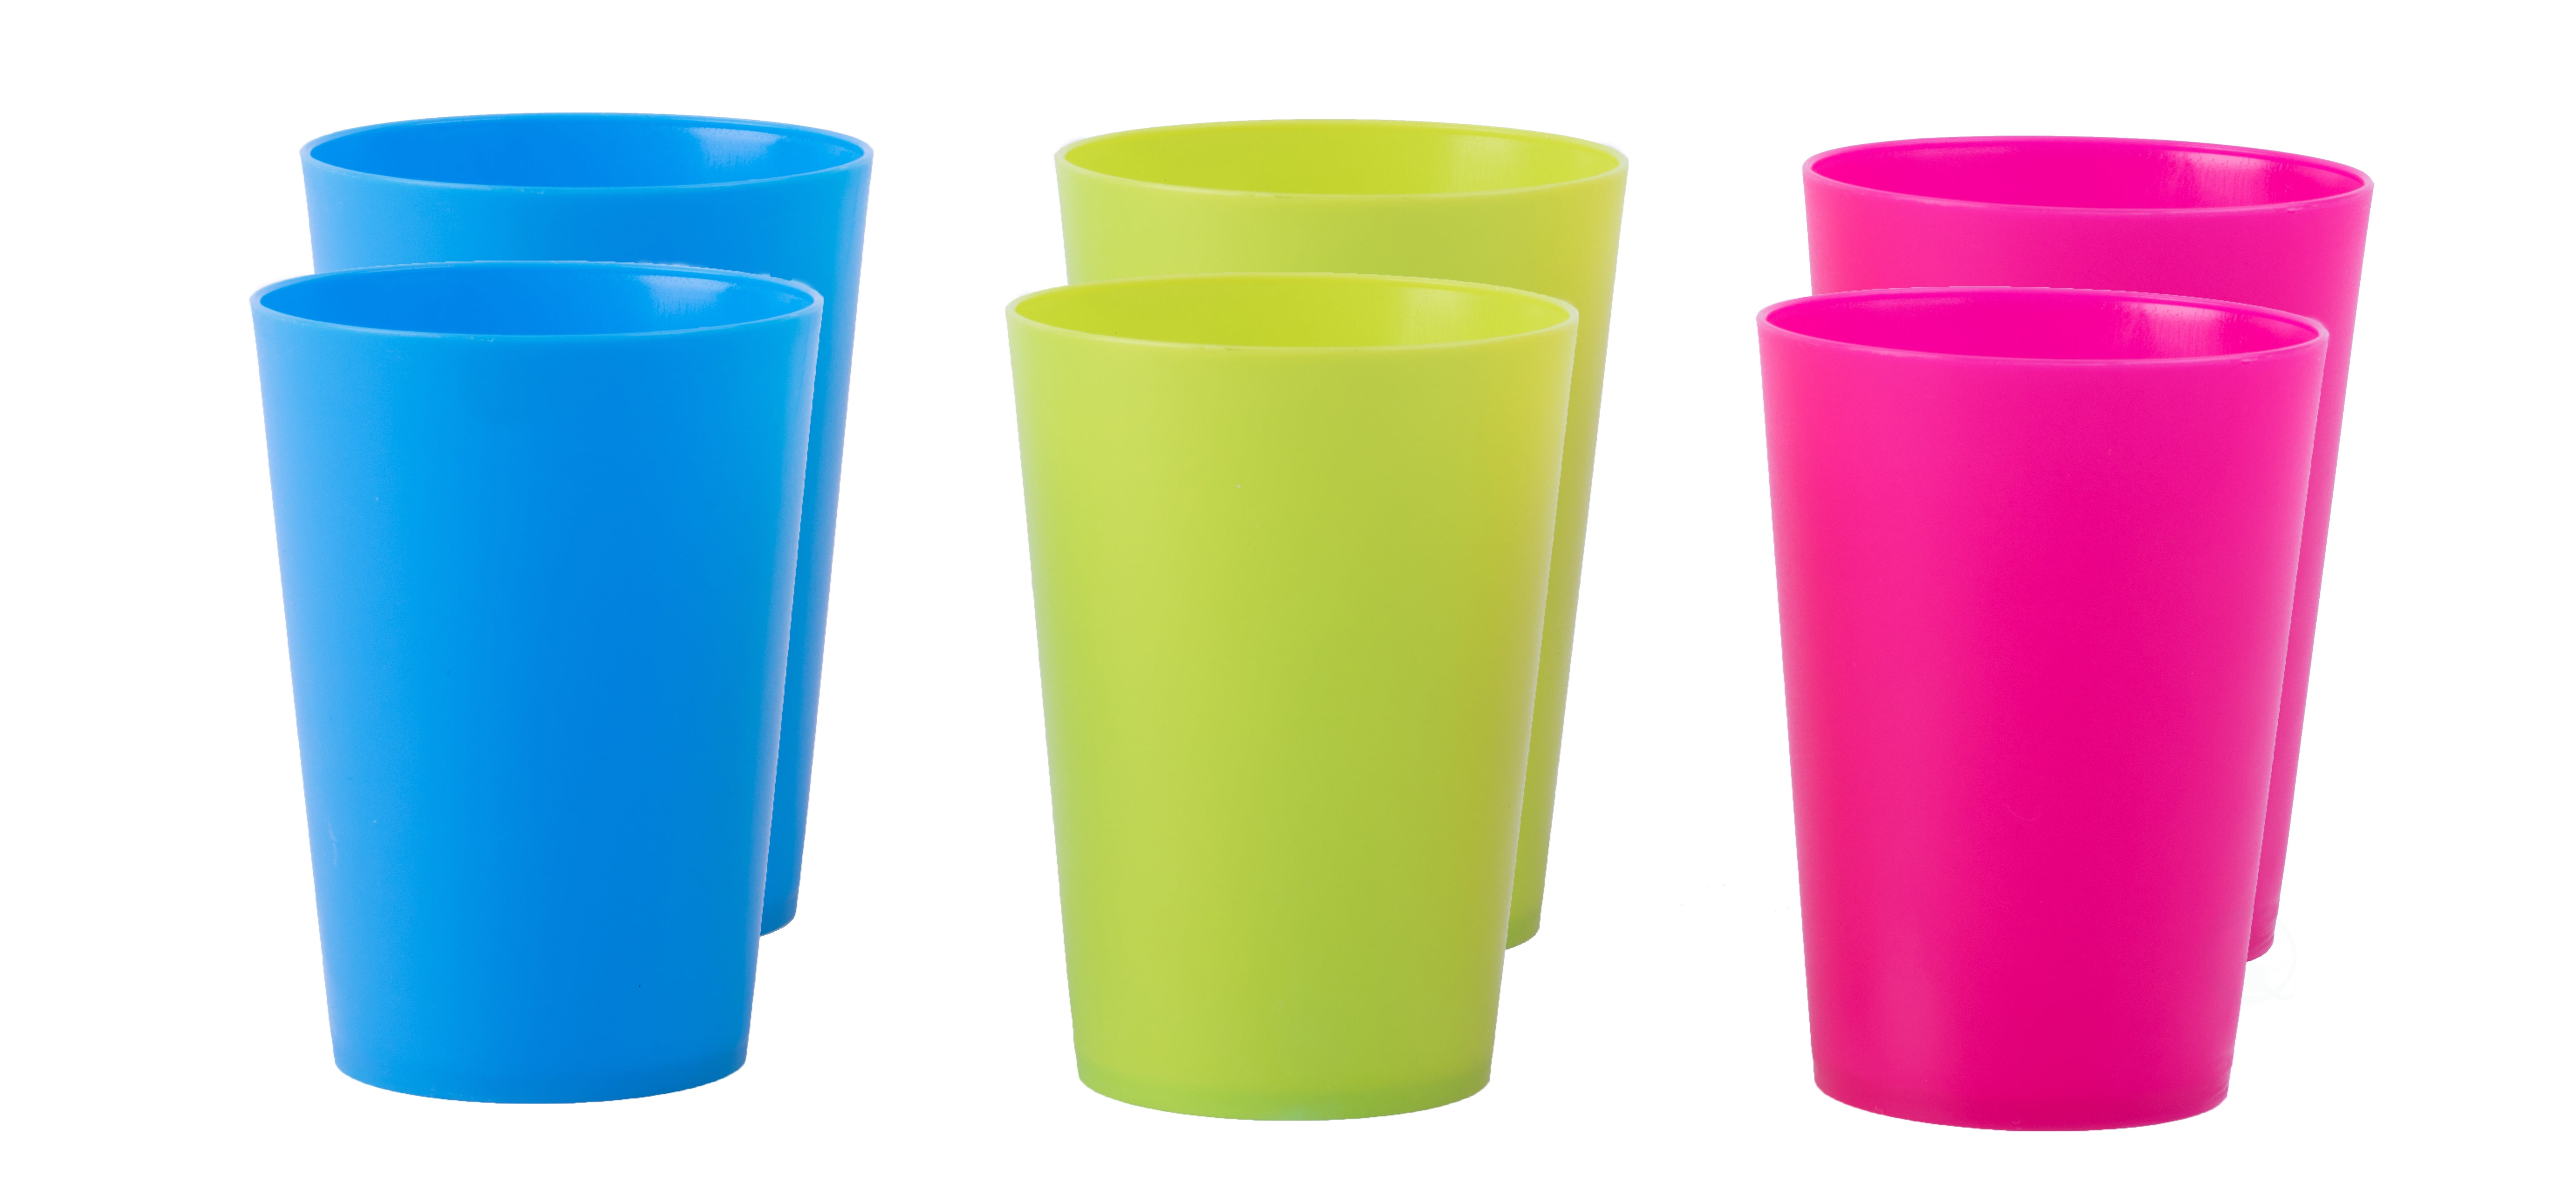 30 Drinking Cup Green 0,4 L Plastic Cups Reusable Cup Party Mug Cup Reusable 